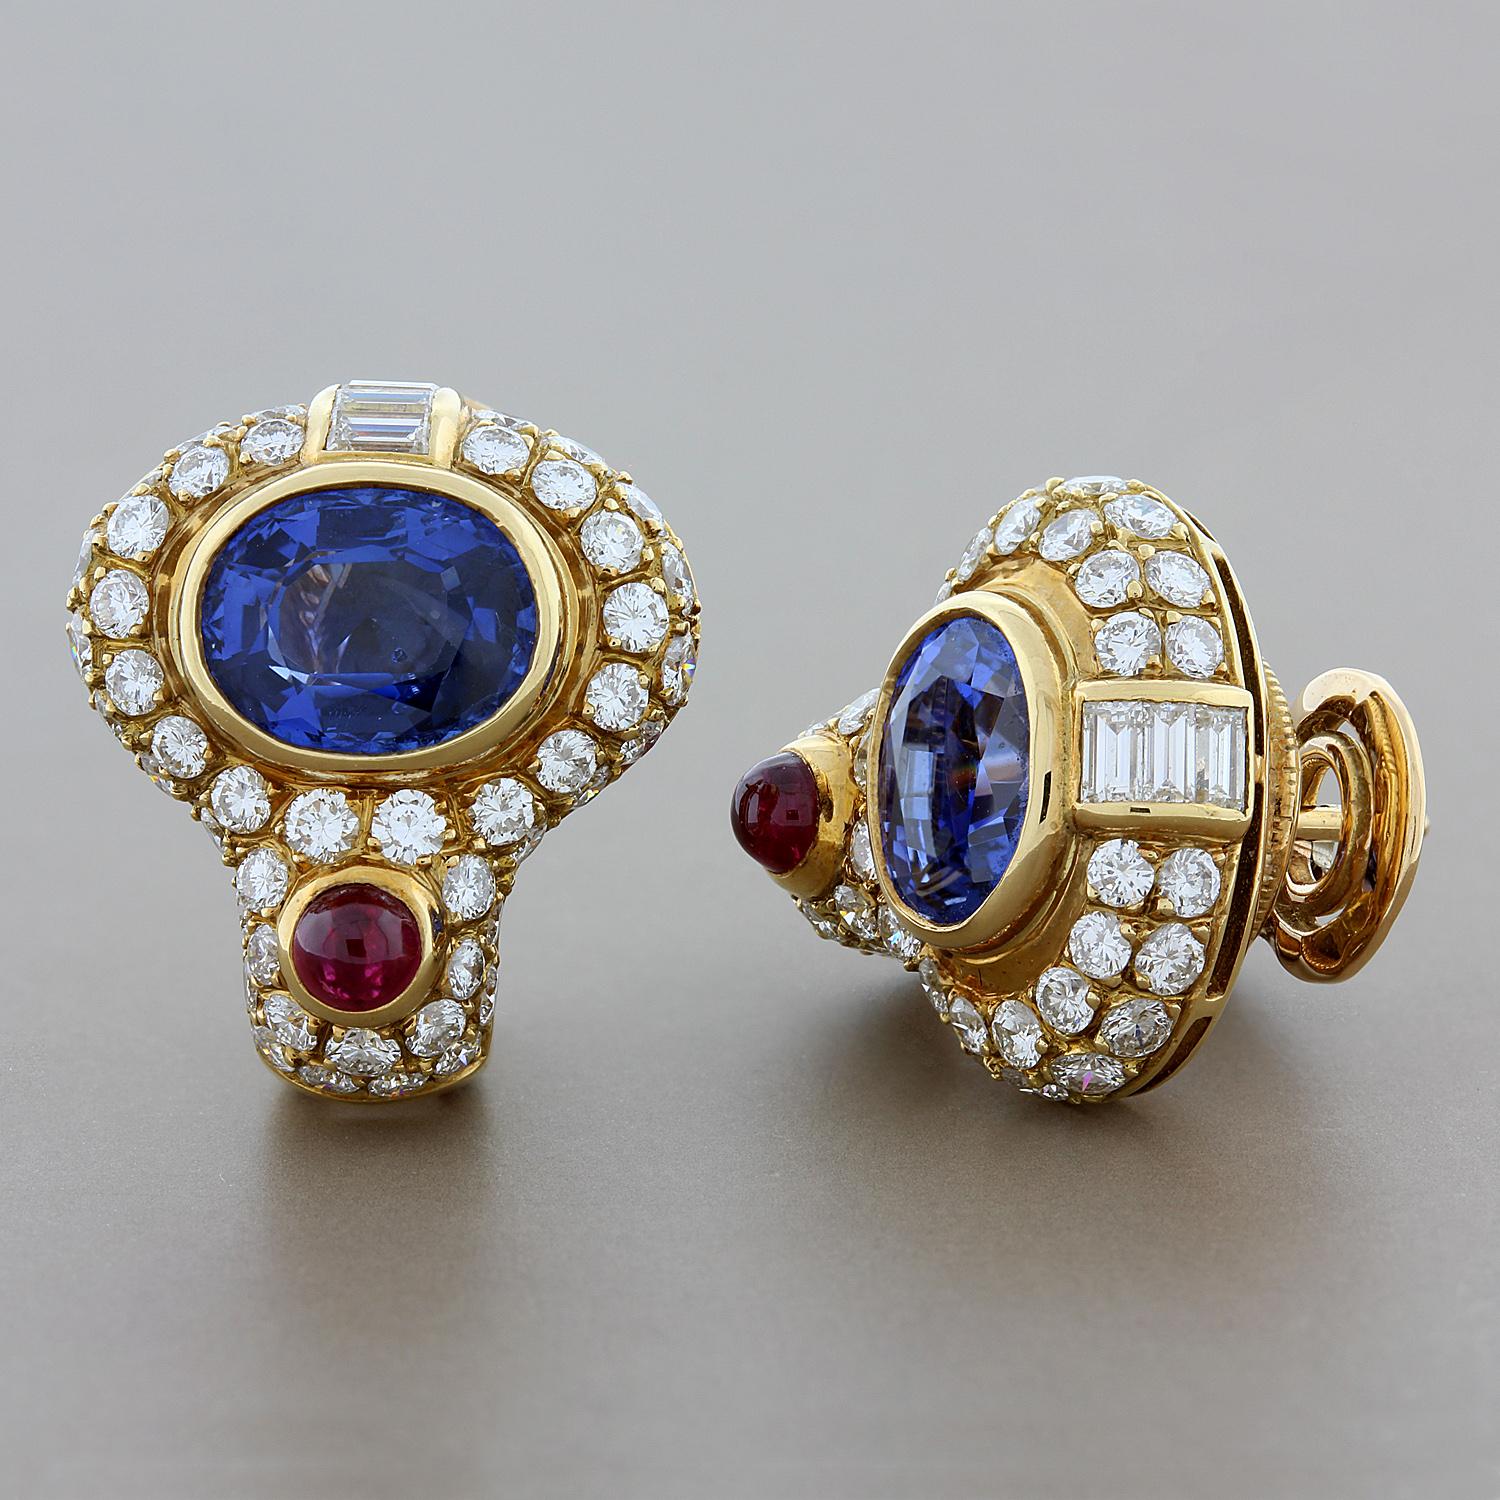 It's hard to resist the superb quality of these Bvlgari earrings. They feature 4.80 carats of natural blue oval sapphires, 0.30 carats of round cabochon red rubies and 3.16 carats of VS quality colorless round and baguette cut diamonds. Set in 18K